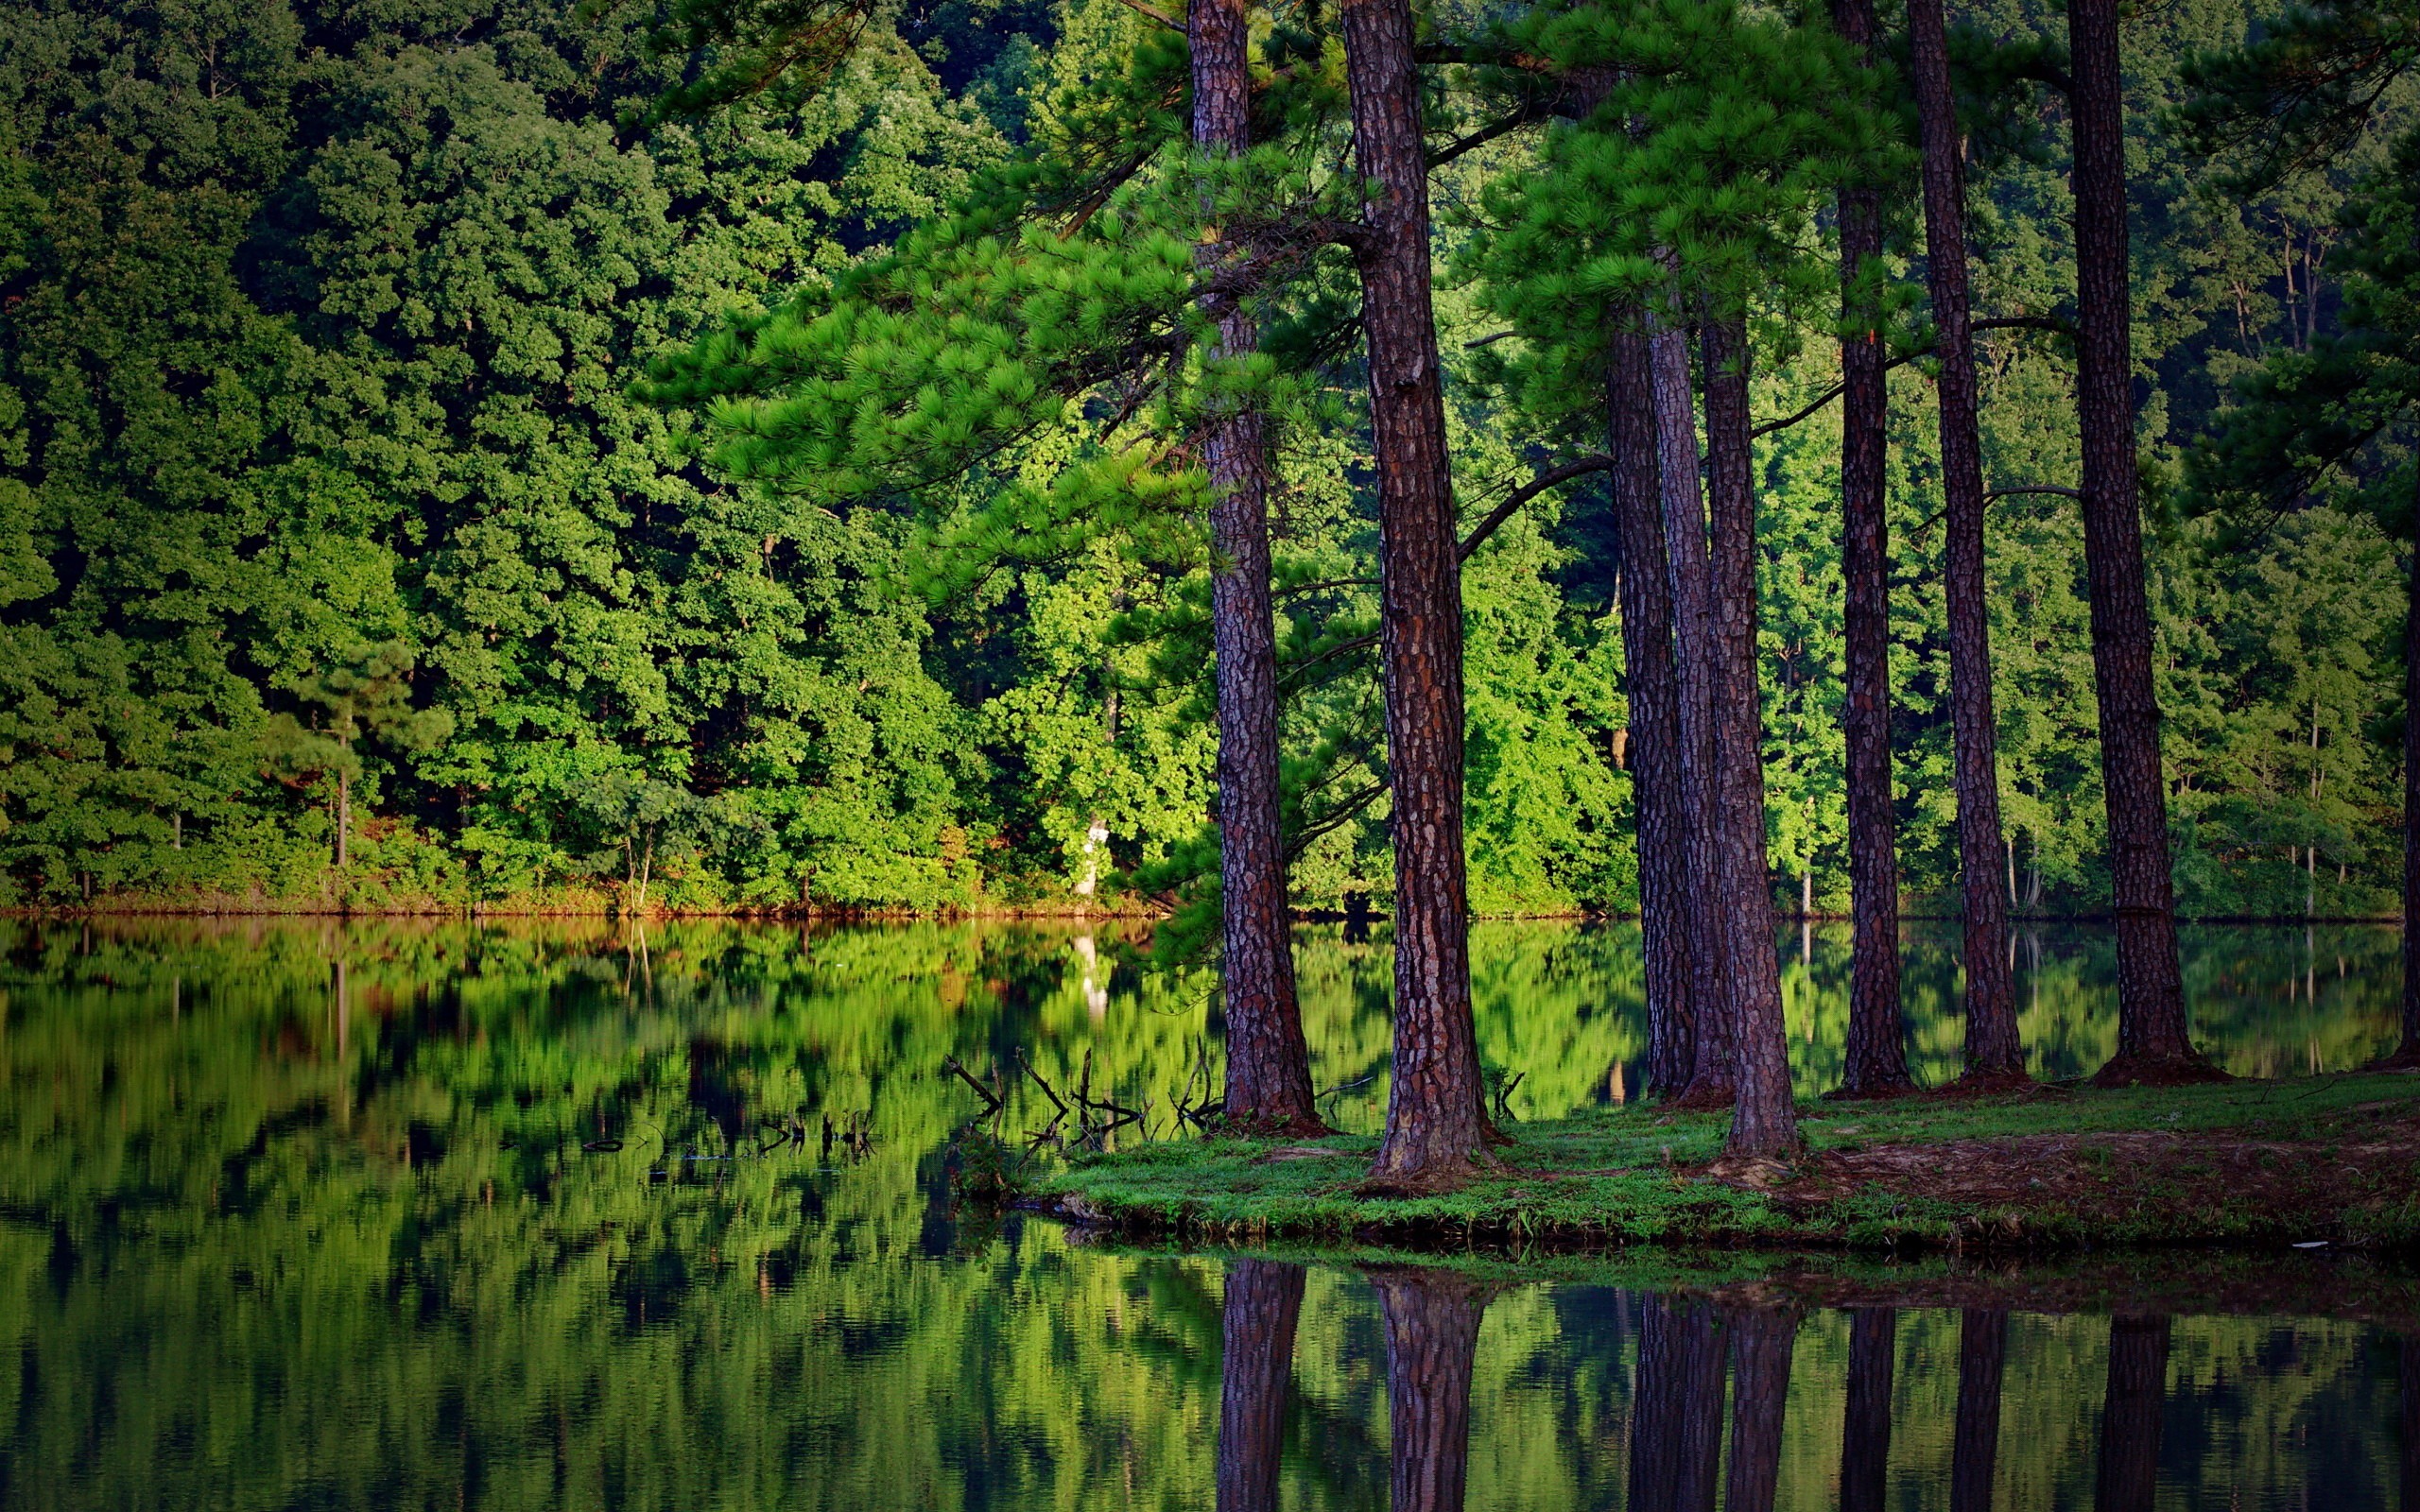 General 2560x1600 summer trees forest lake reflection spruce landscape nature wood plants